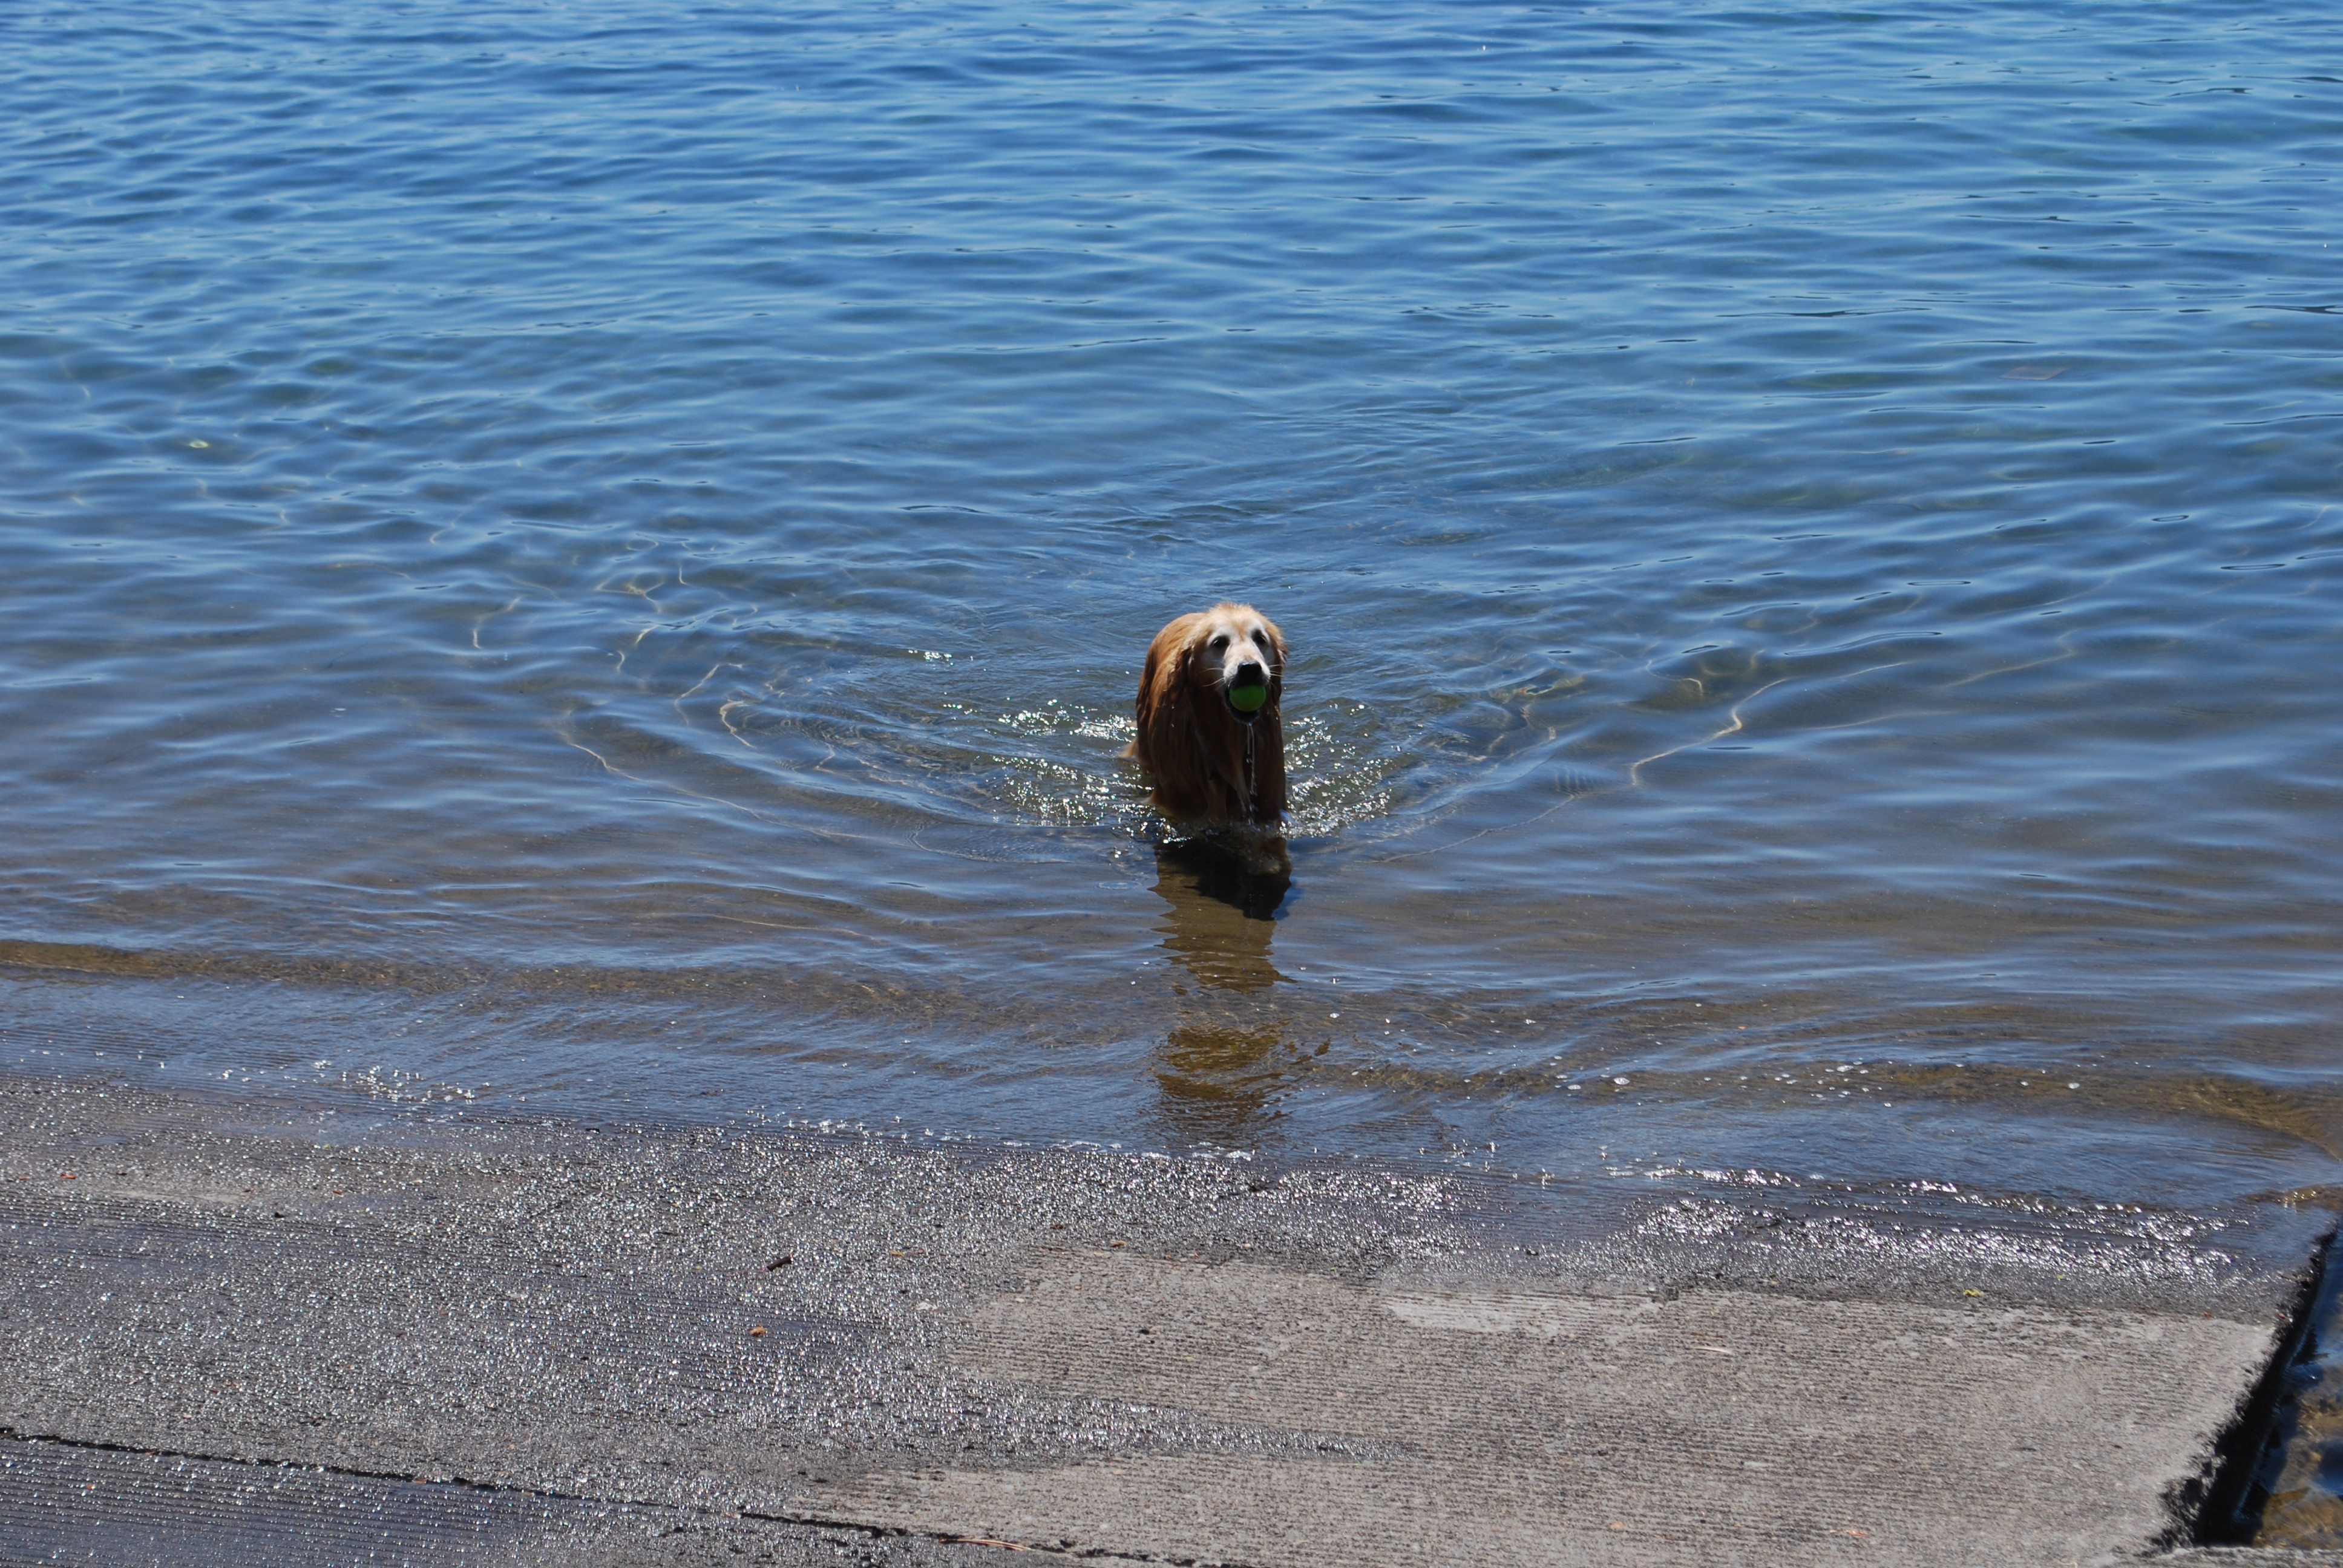 Dog Friendly Beaches in Lake Tahoe | Beaches to bring your dog to